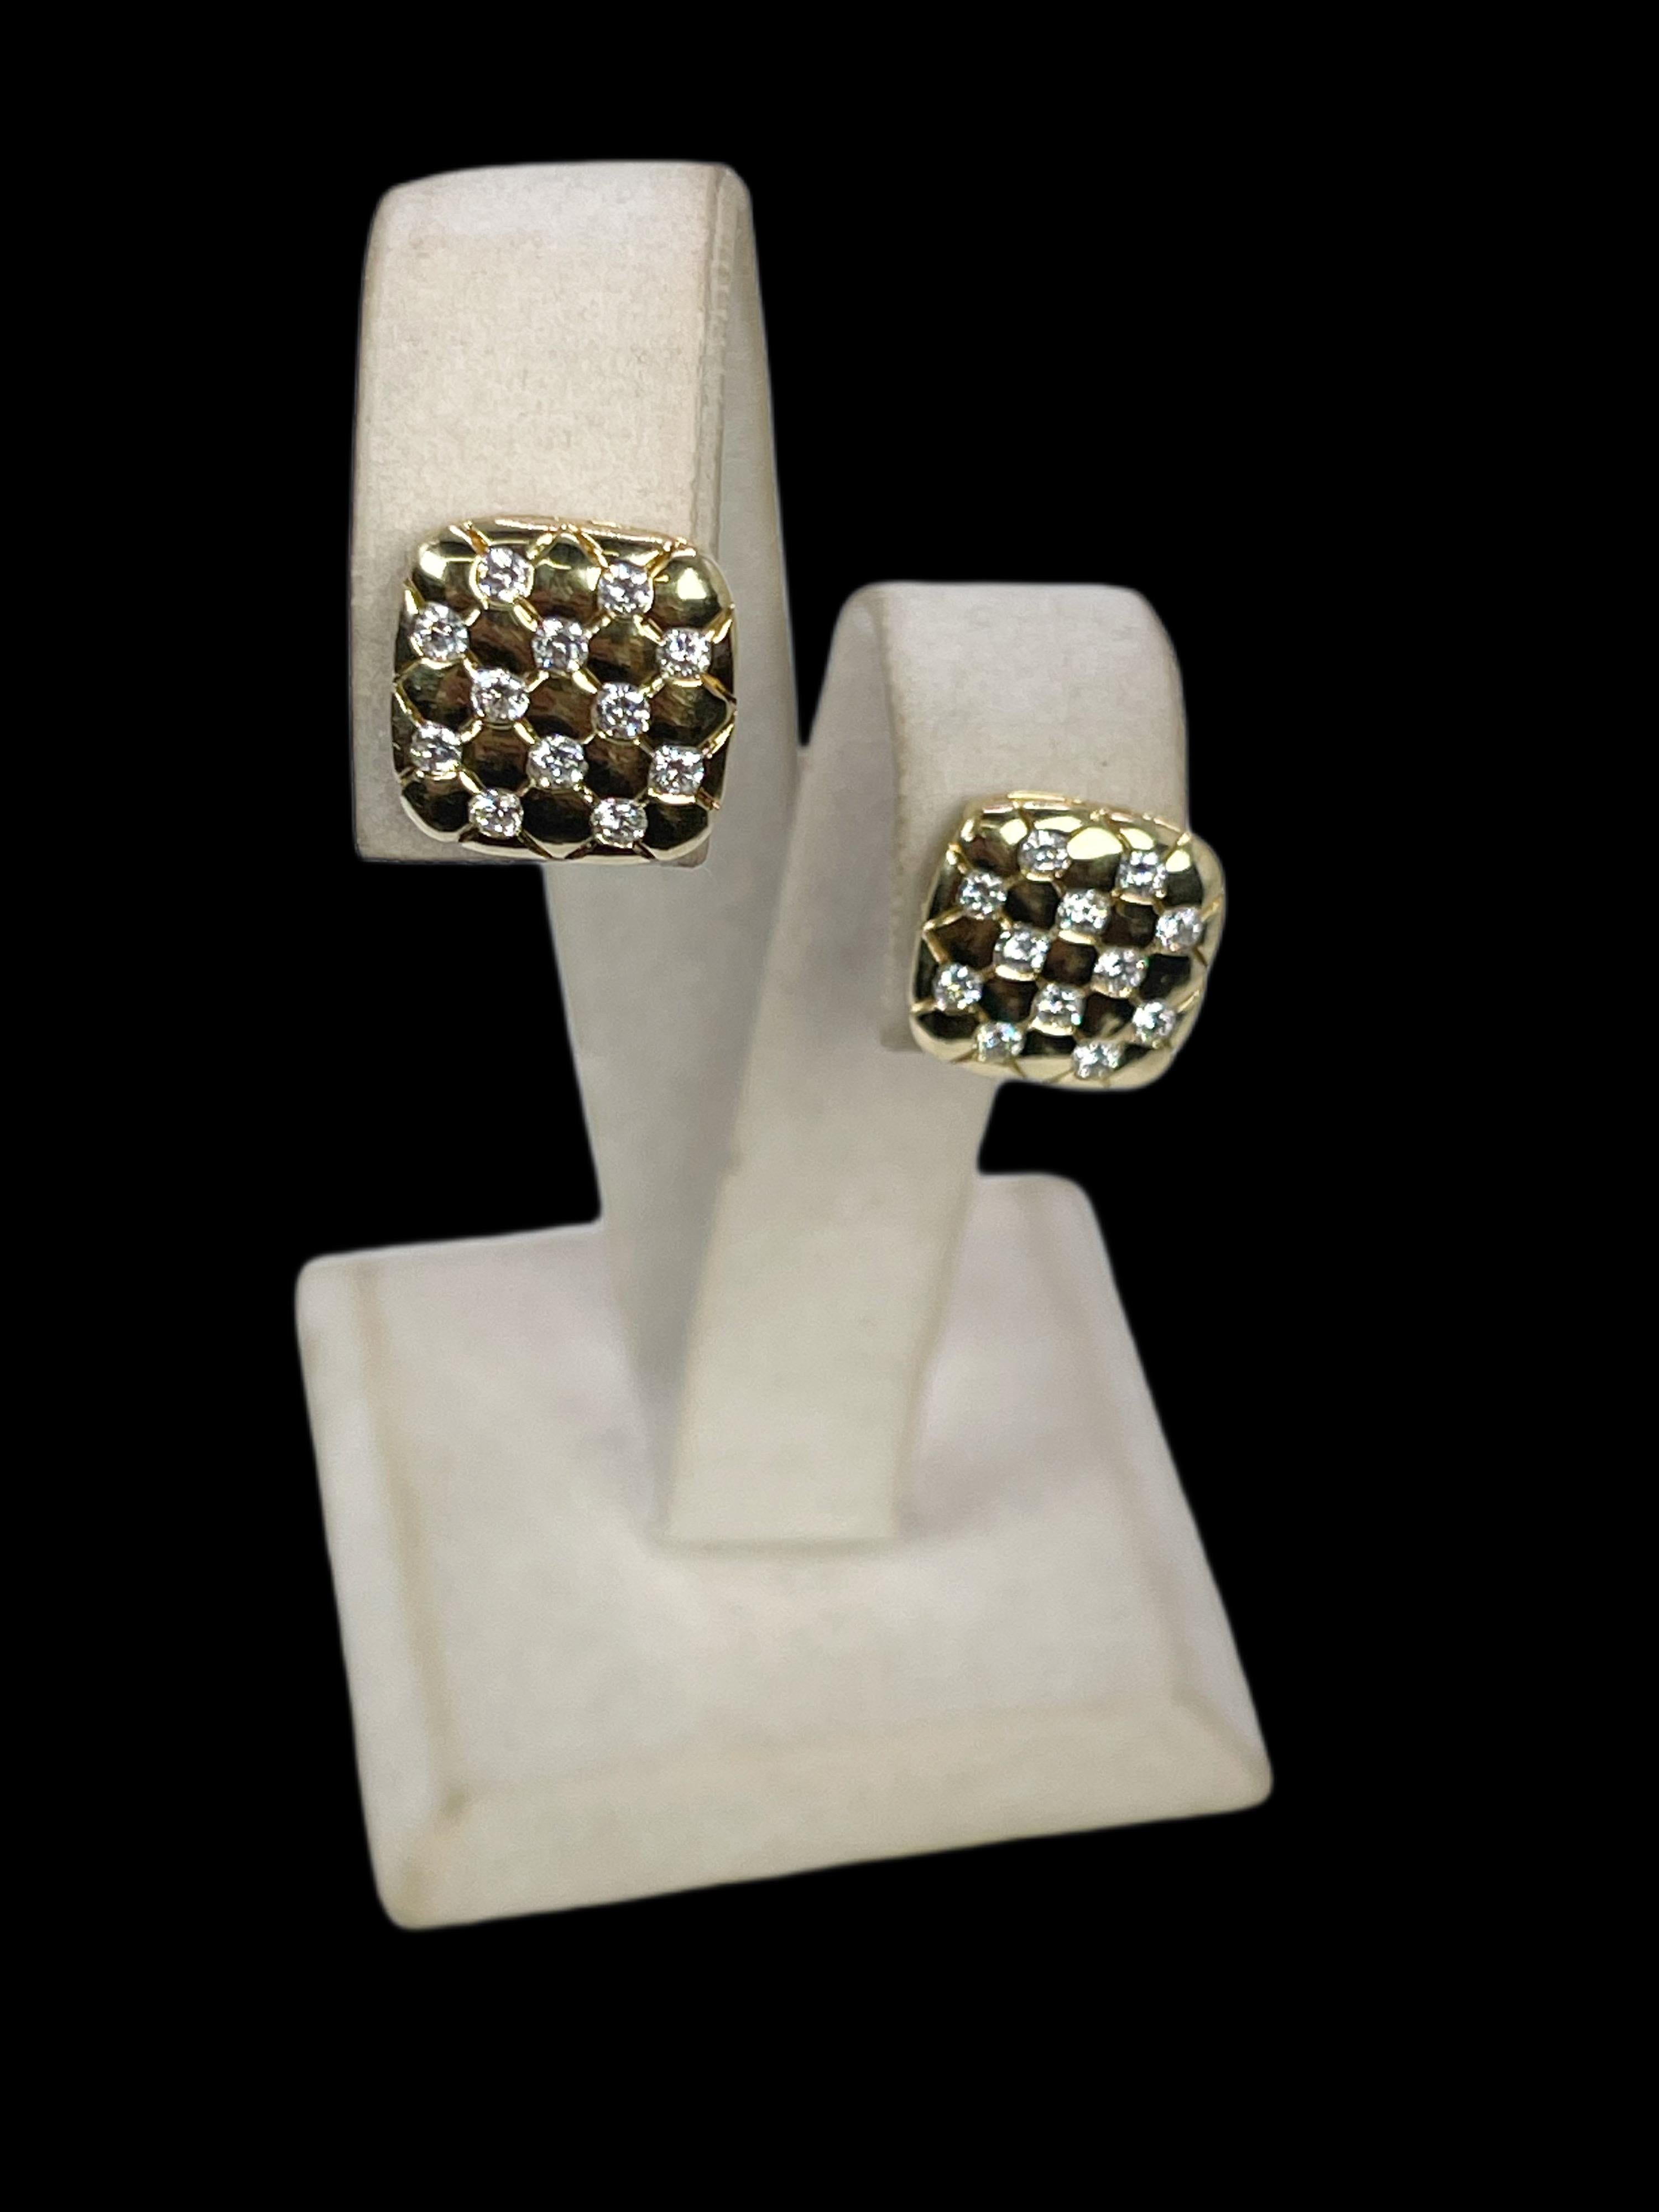 Comfortable pair of diamond earrings, featuring checkered design, half an inch approximate diameter made in 18KT yellow gold with butterfly stud closure.

CENTER STONE: NATURAL DIAMONDS (100% EARTH MINED DIAMONDS)
CARAT: 0.95CT
CLARITY: VS-SI
COLOR: